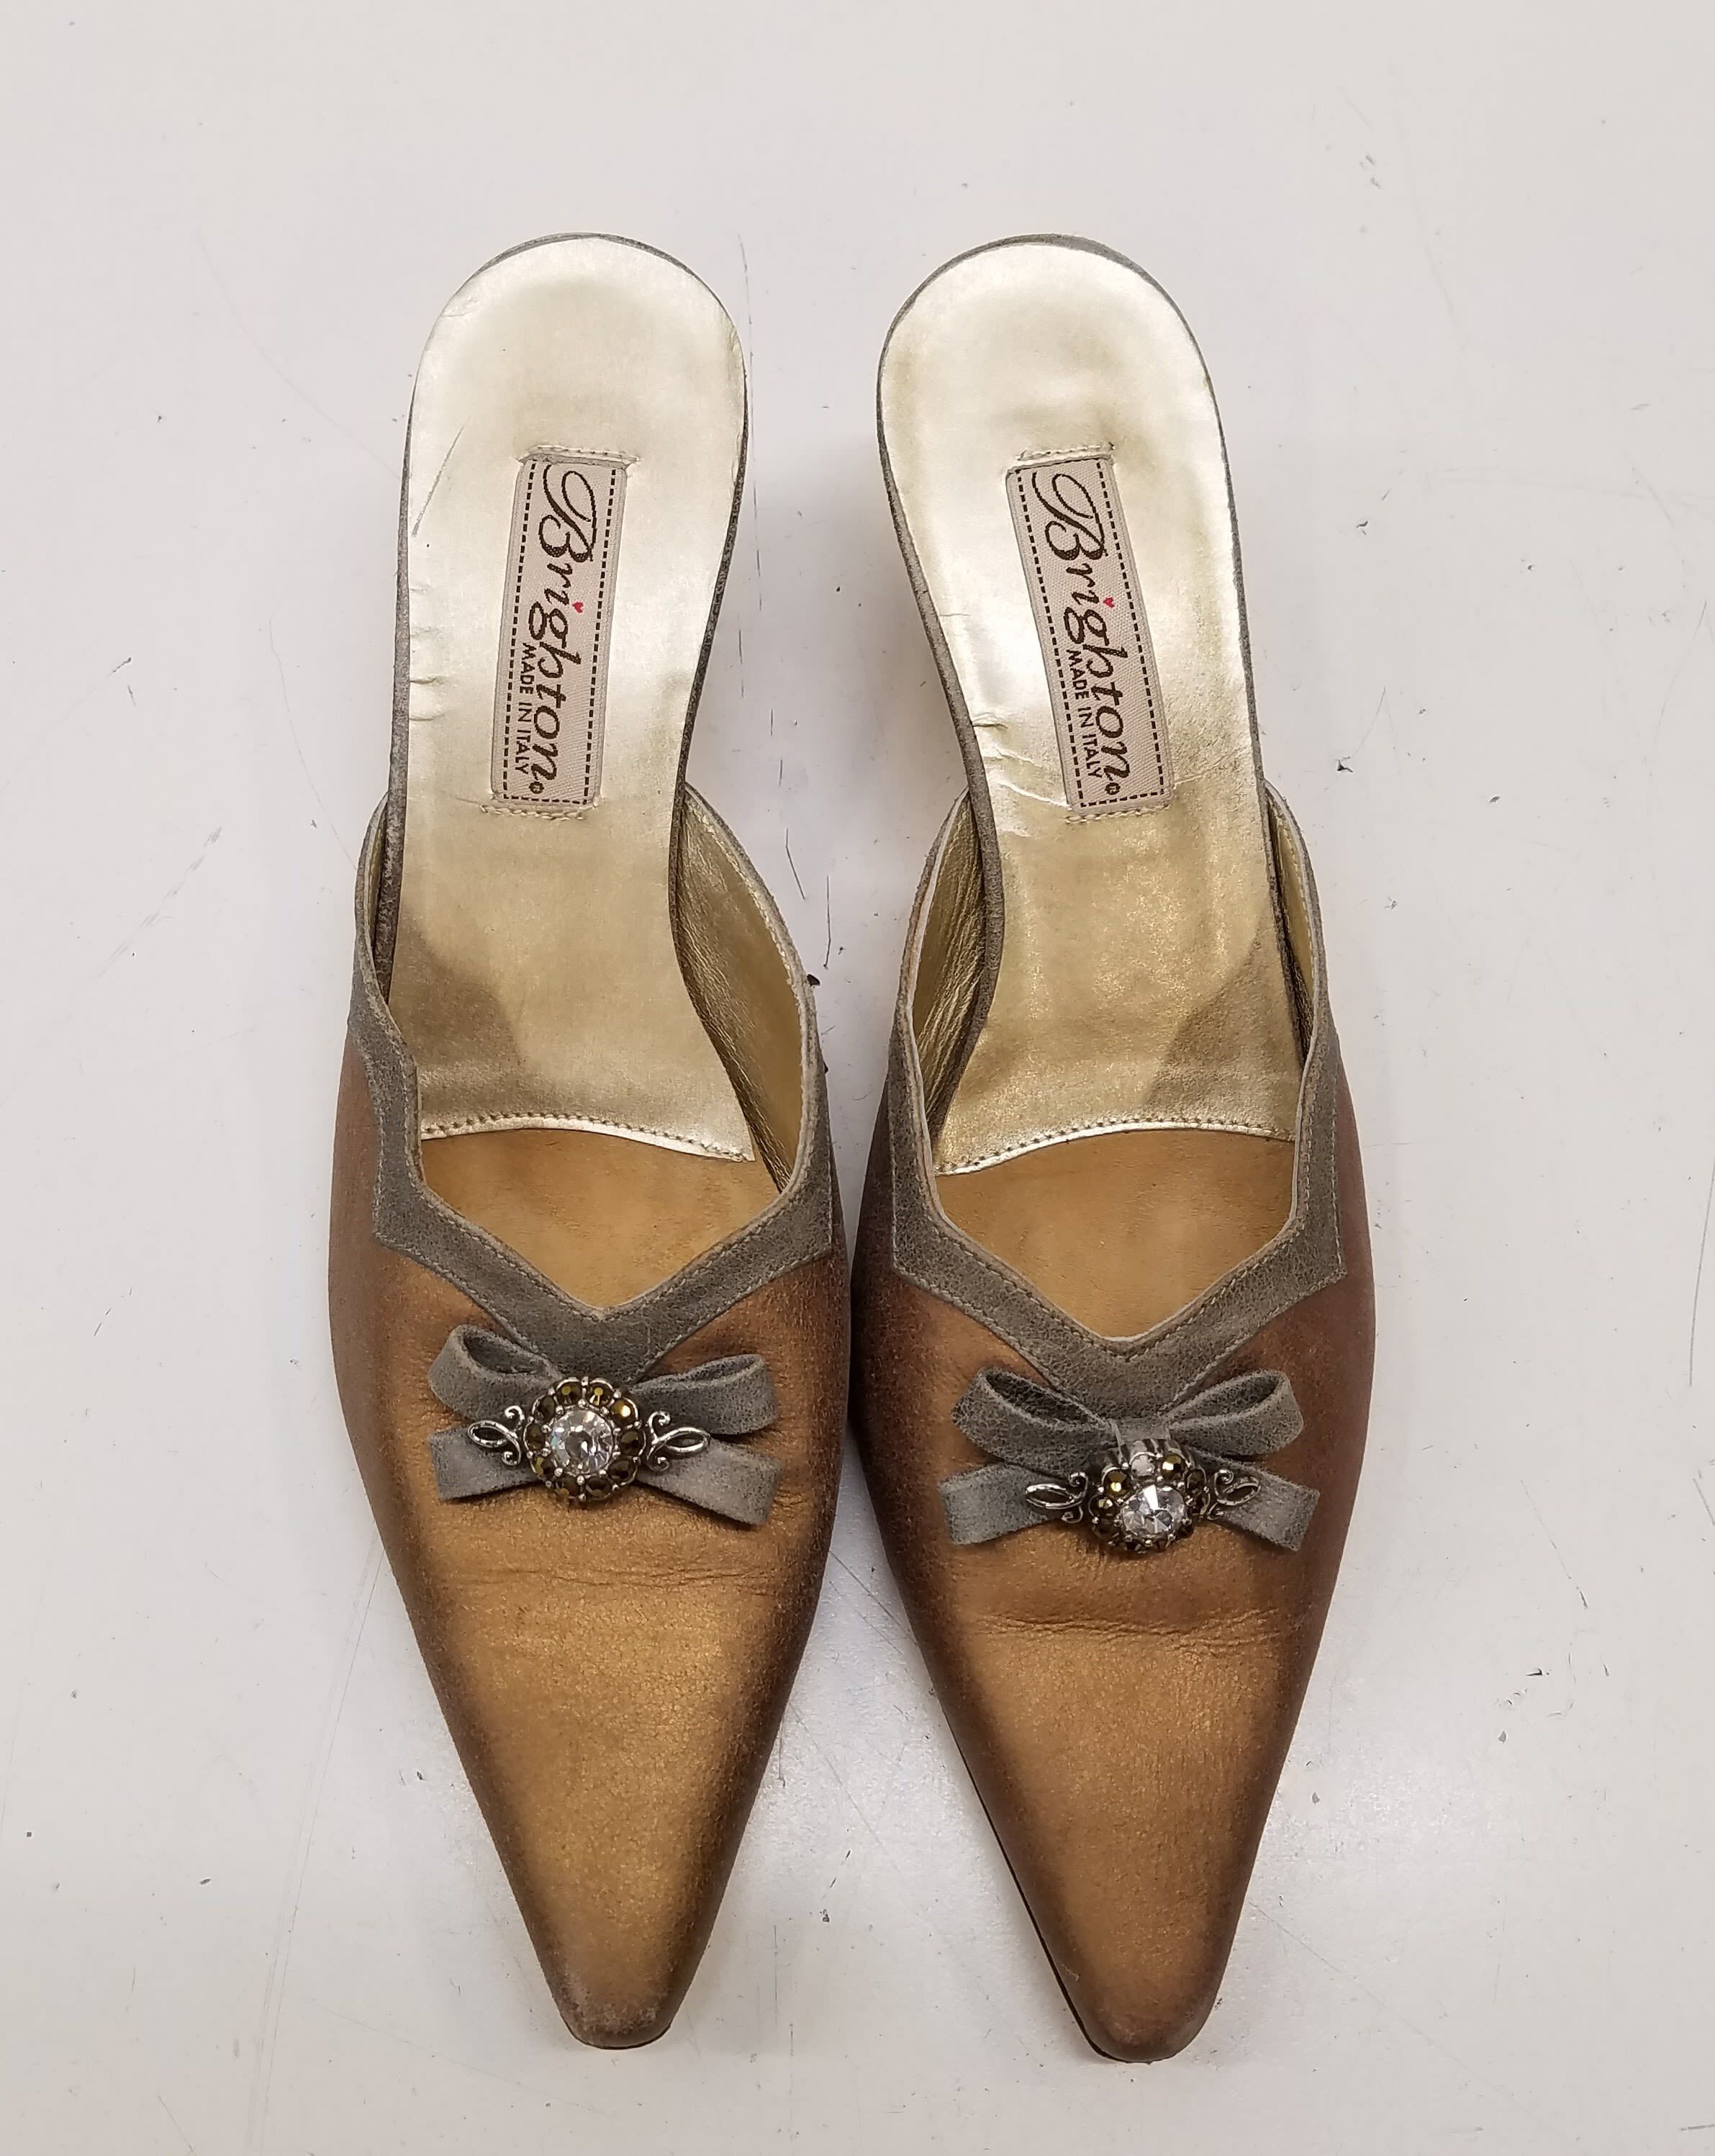 Brighton Women's Leather Patti Heels Strap Sandals Shoes Brown Size 7M for  Sale in Hermitage, TN - OfferUp